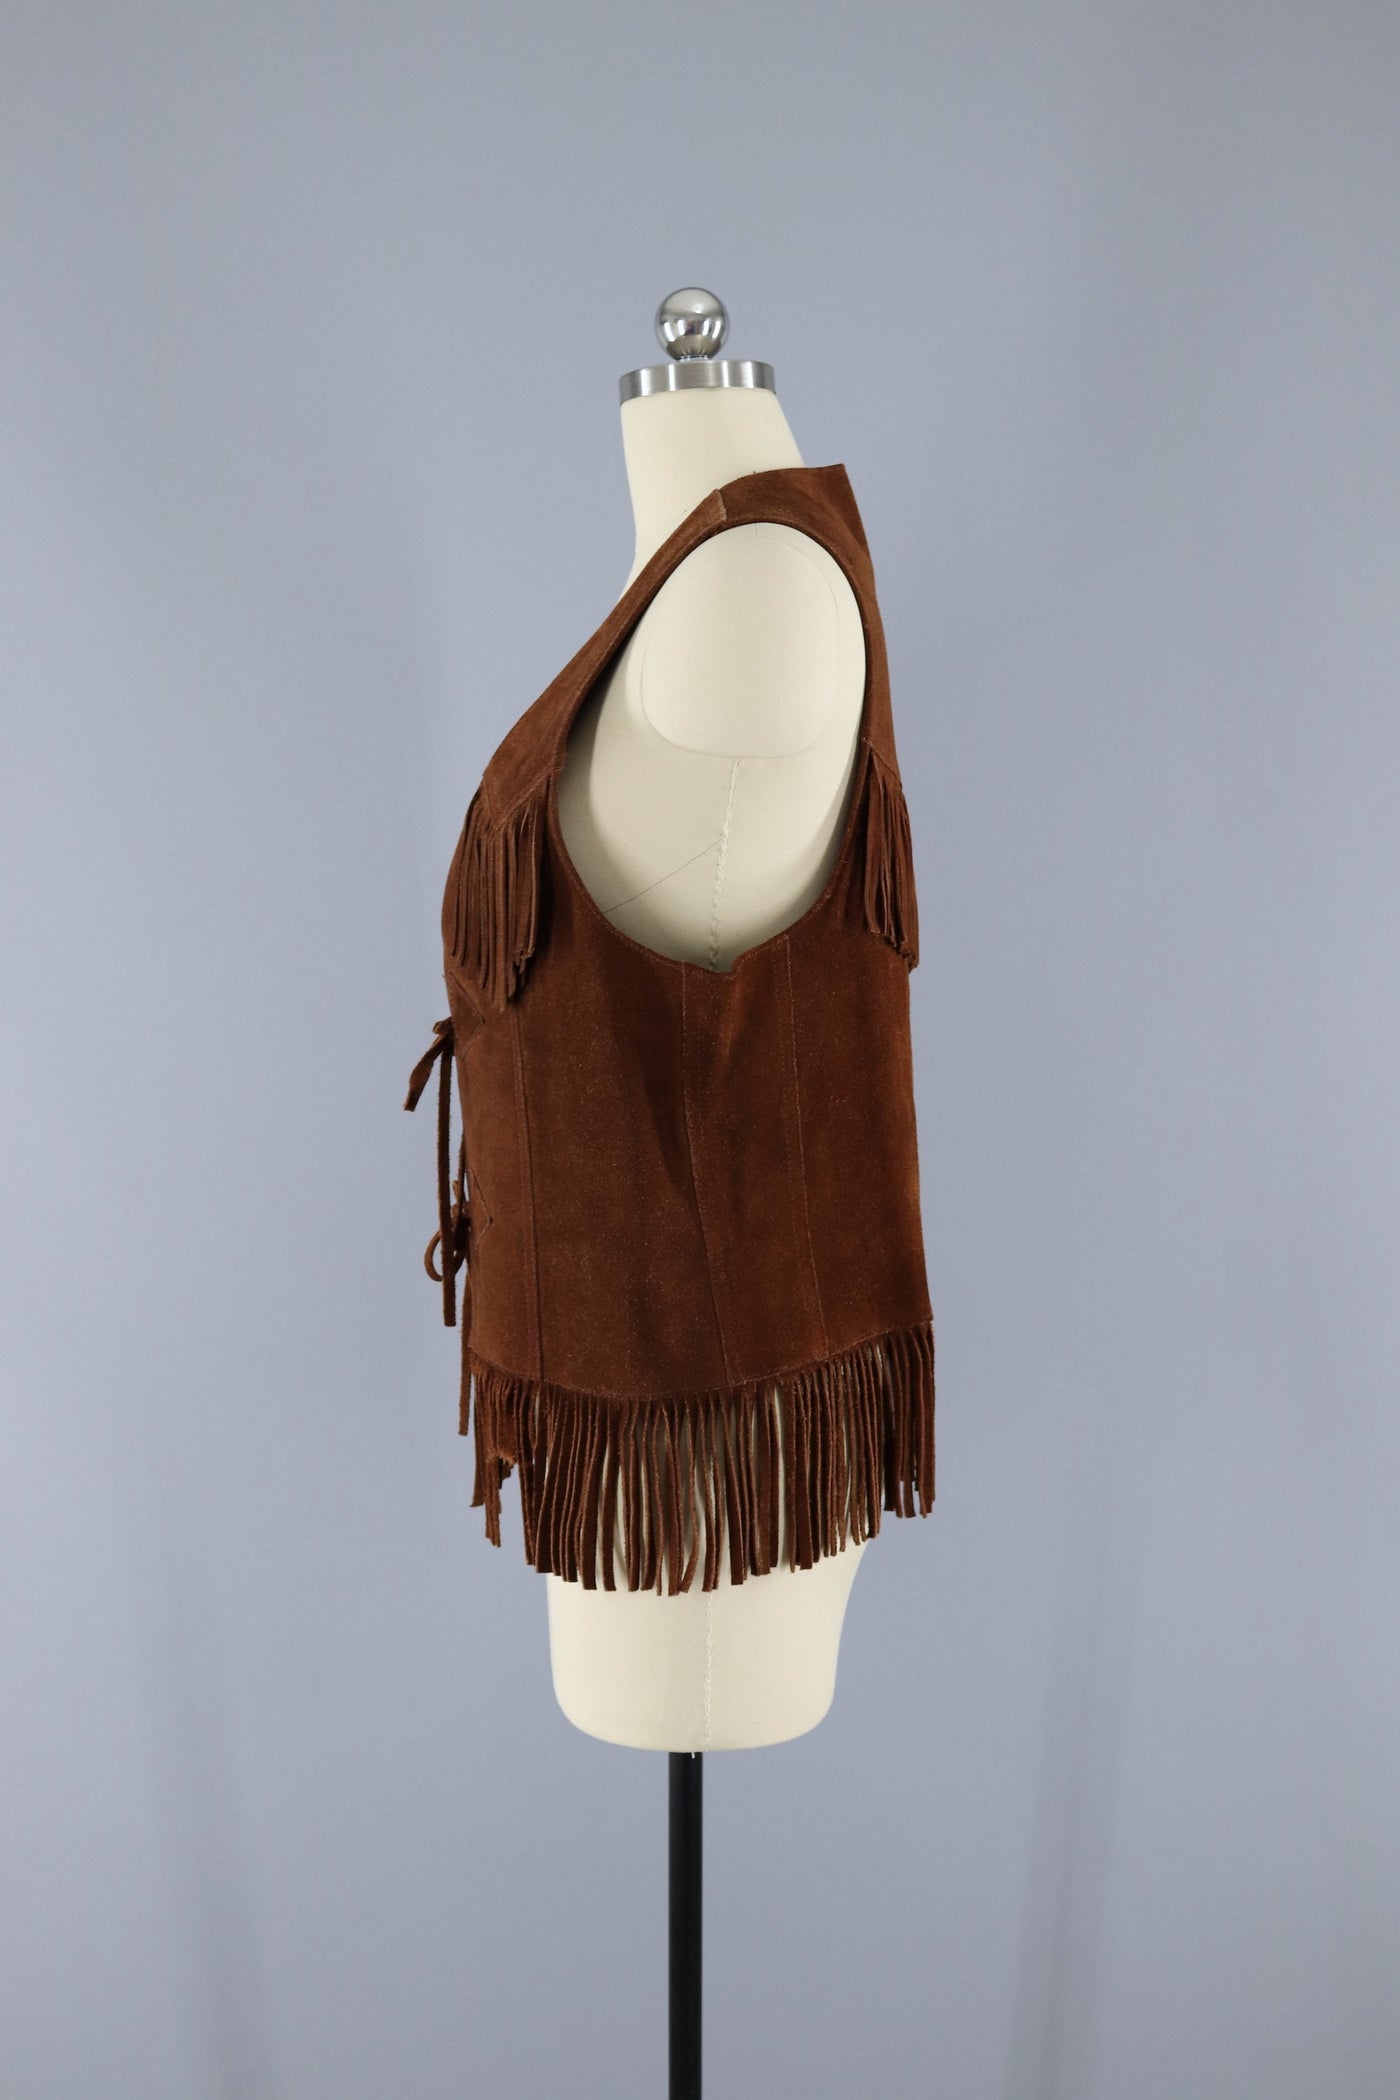 Vintage 1960s Fringed Suede Vest - ThisBlueBird